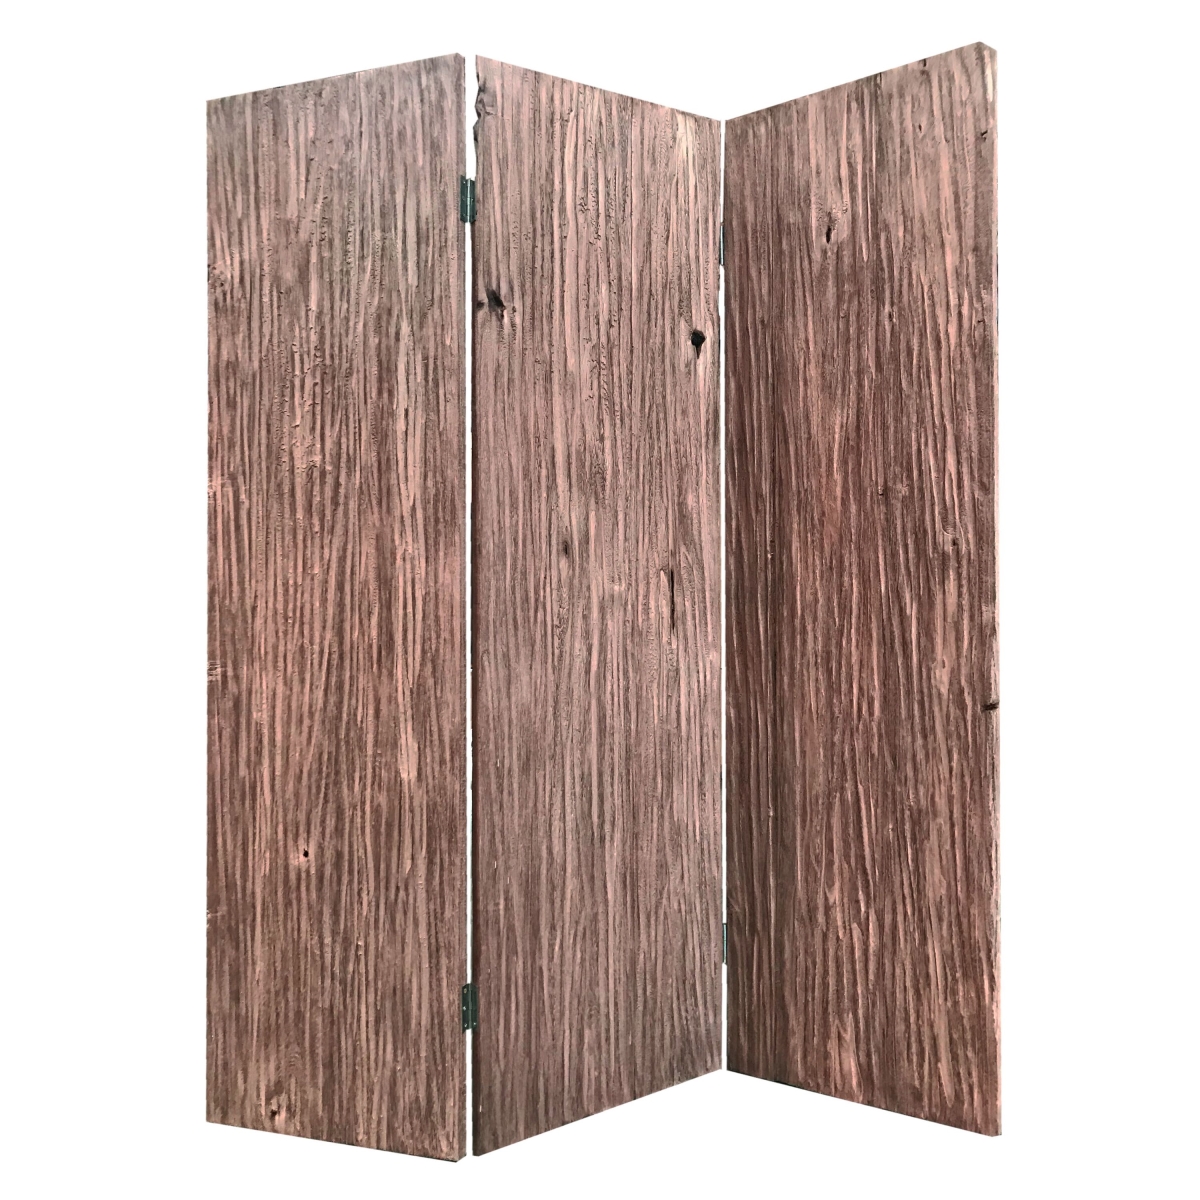 342771 53 X 2 X 72 In. Brown Wood Woodland Screen With 3 Panel